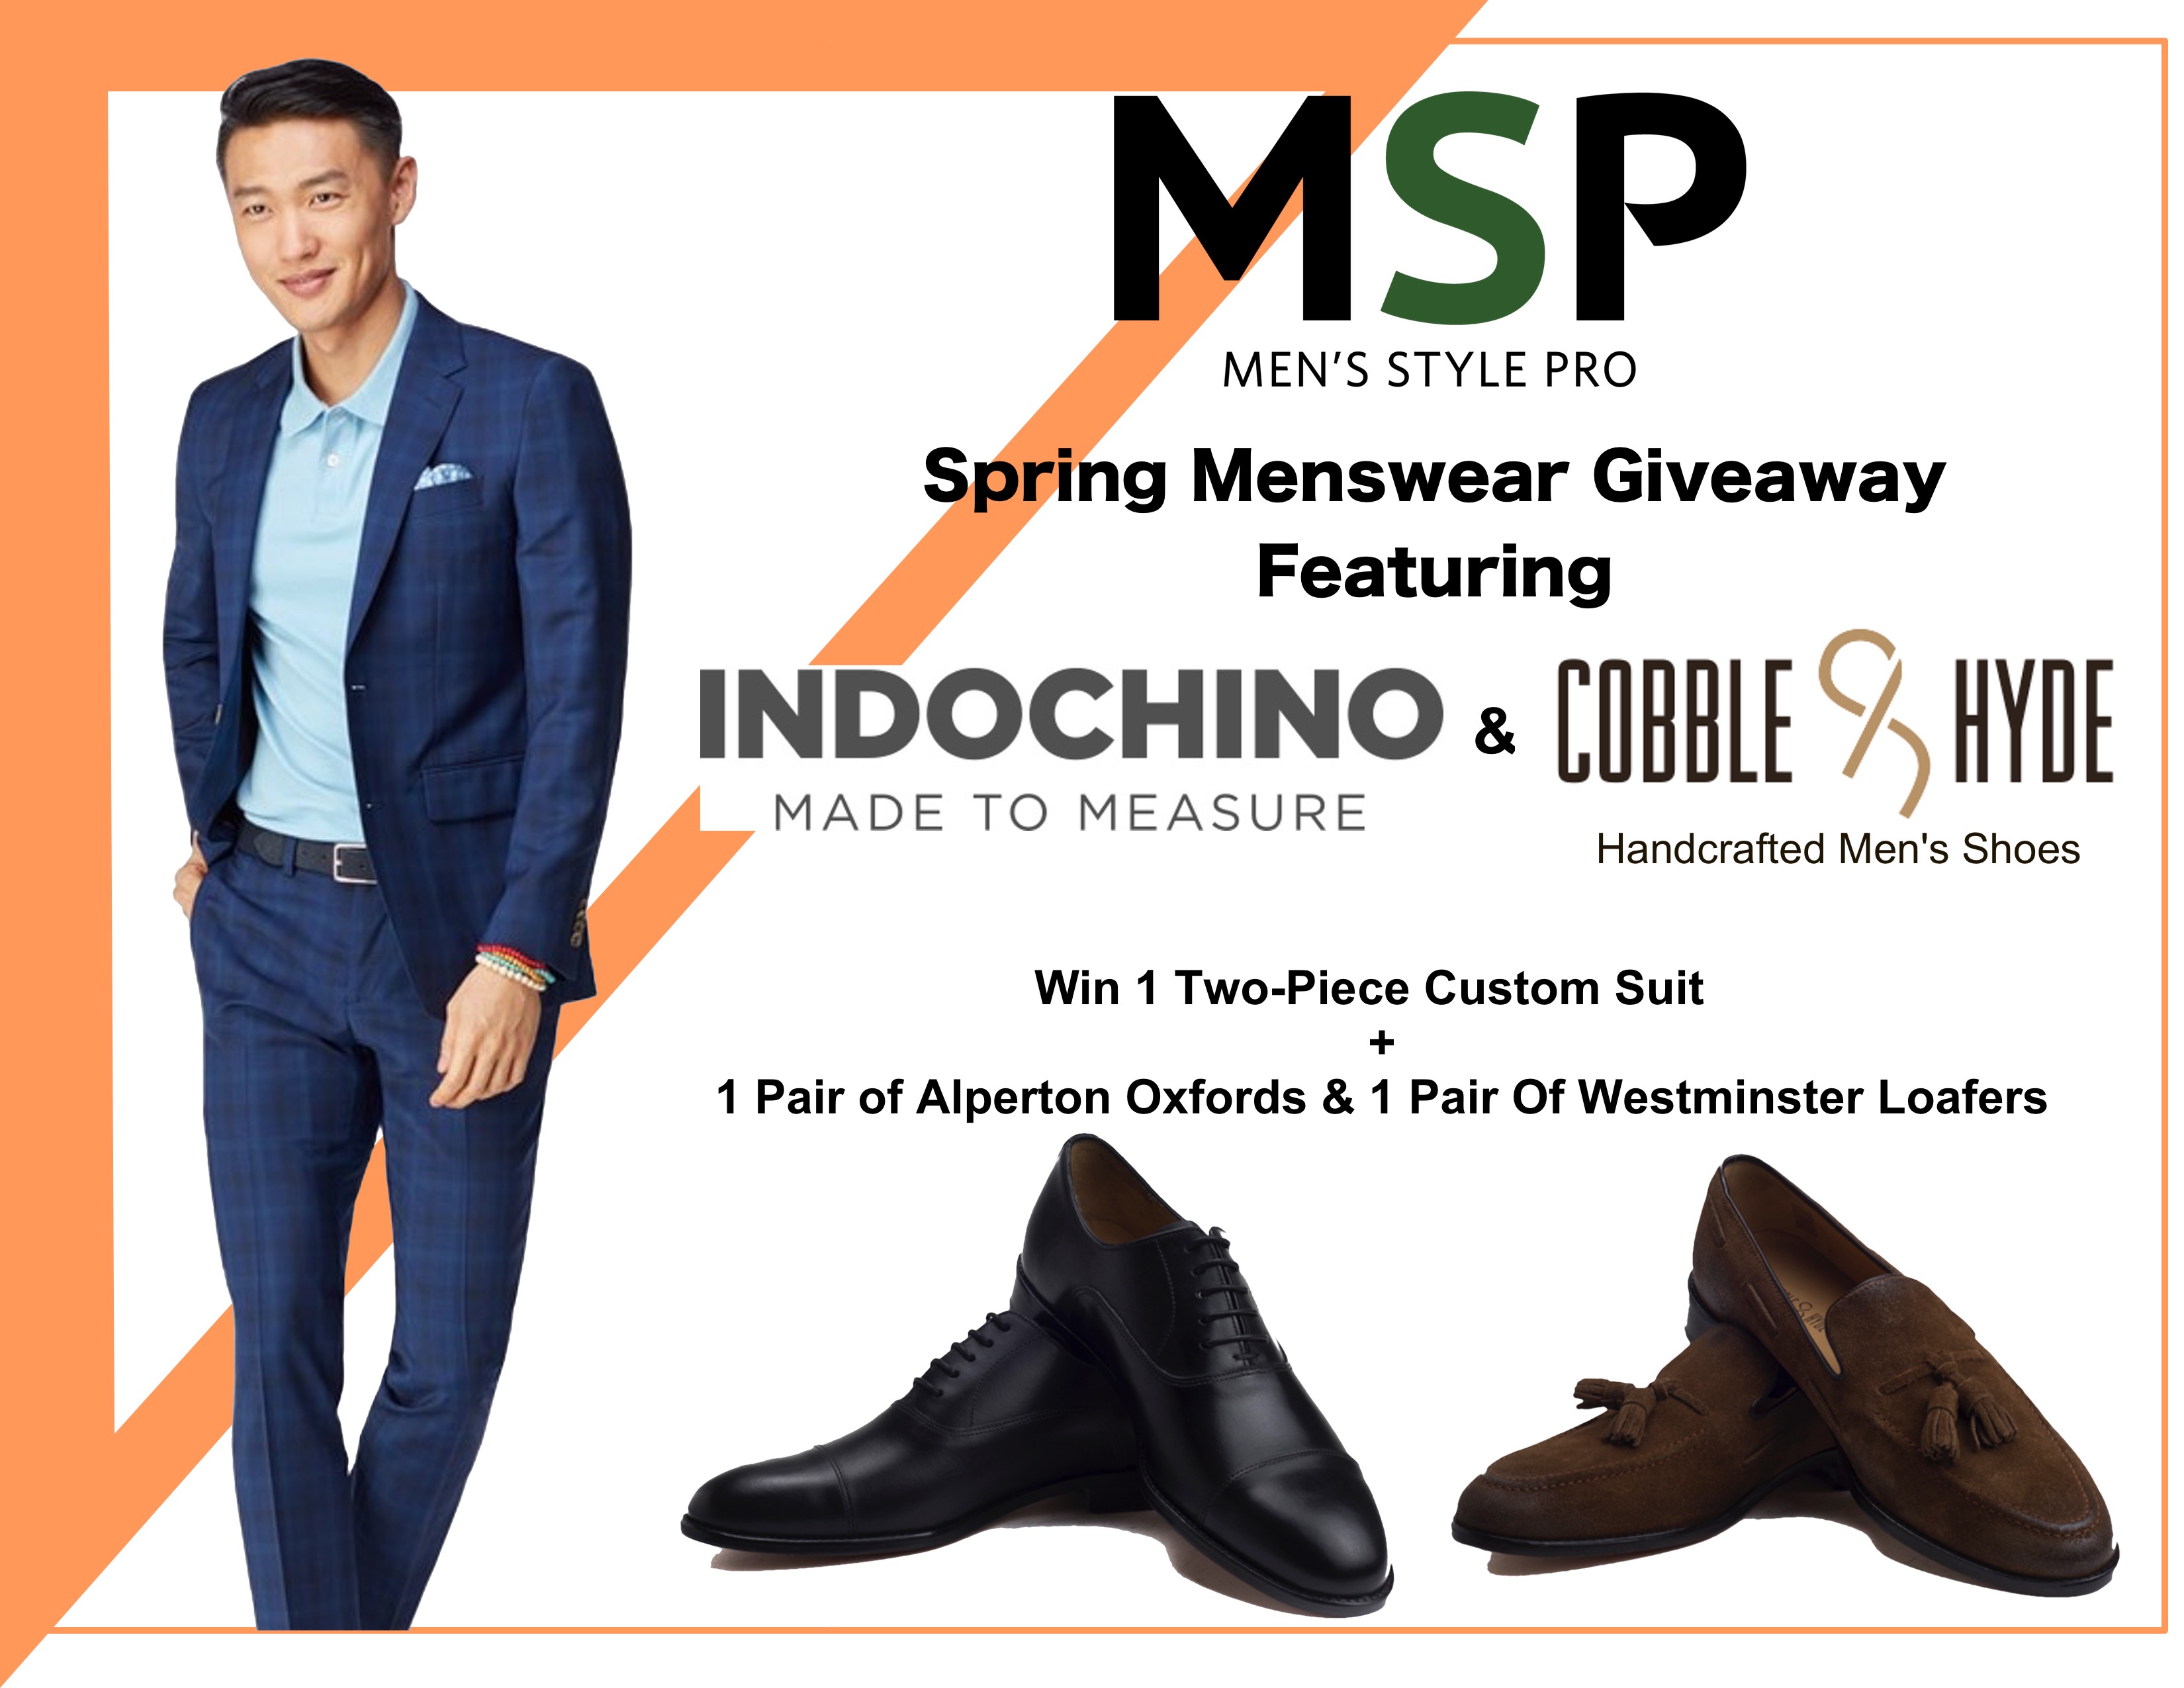 MSP Cobble & Hyde x Indochino Spring Menswear Giveaway